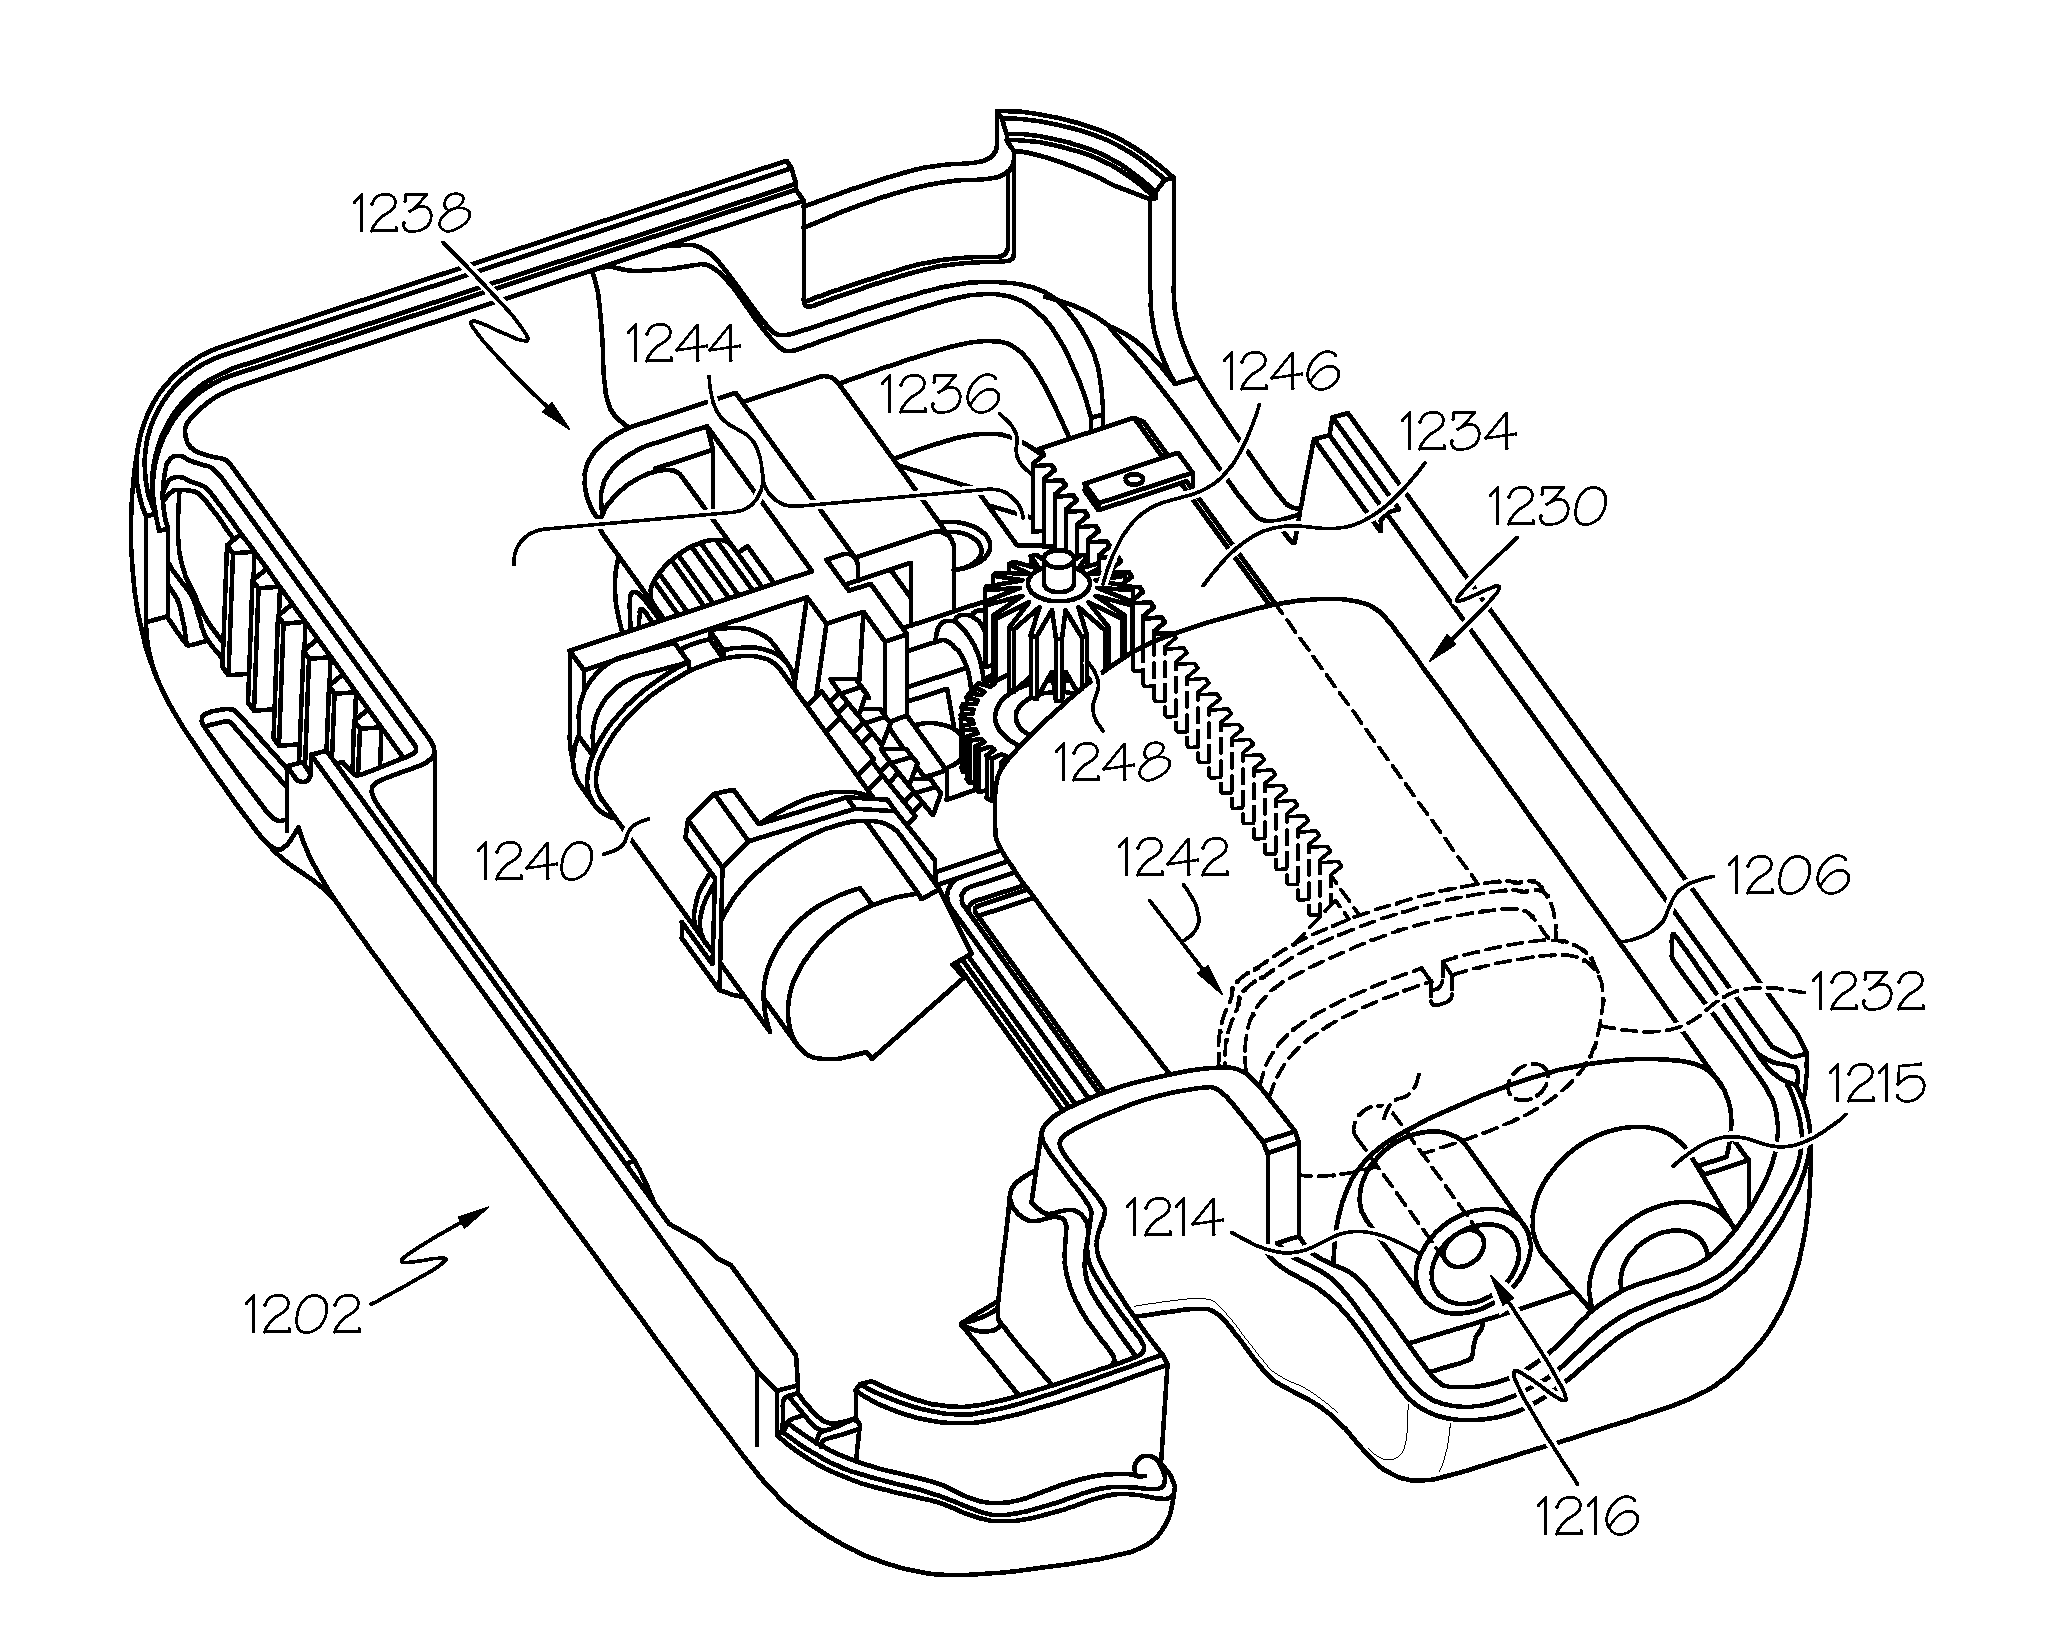 Fluid reservoir seating procedure for a fluid infusion device